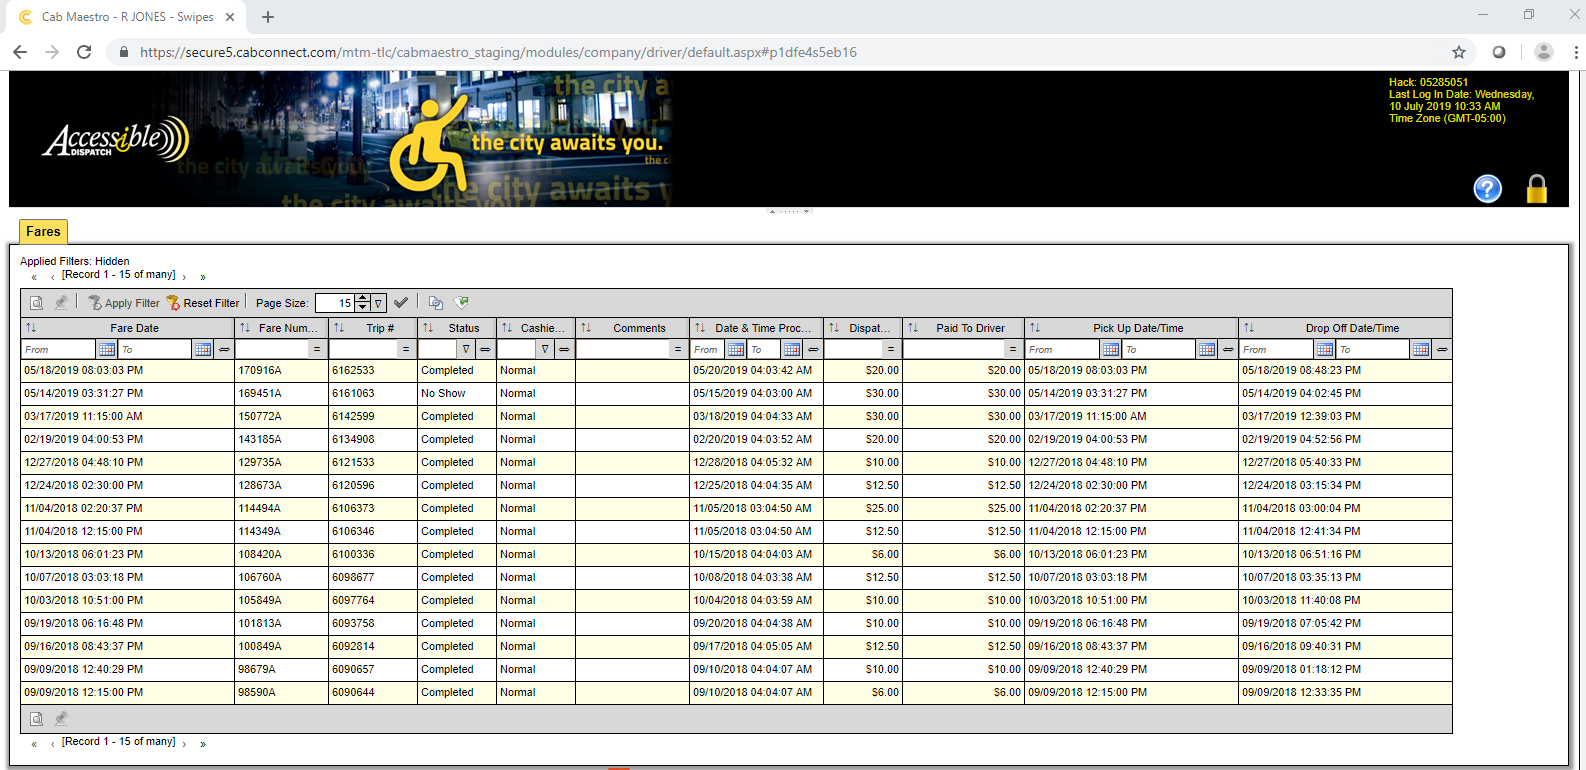 Screen shot of home page, which will show all trip related details on driver portal page. 